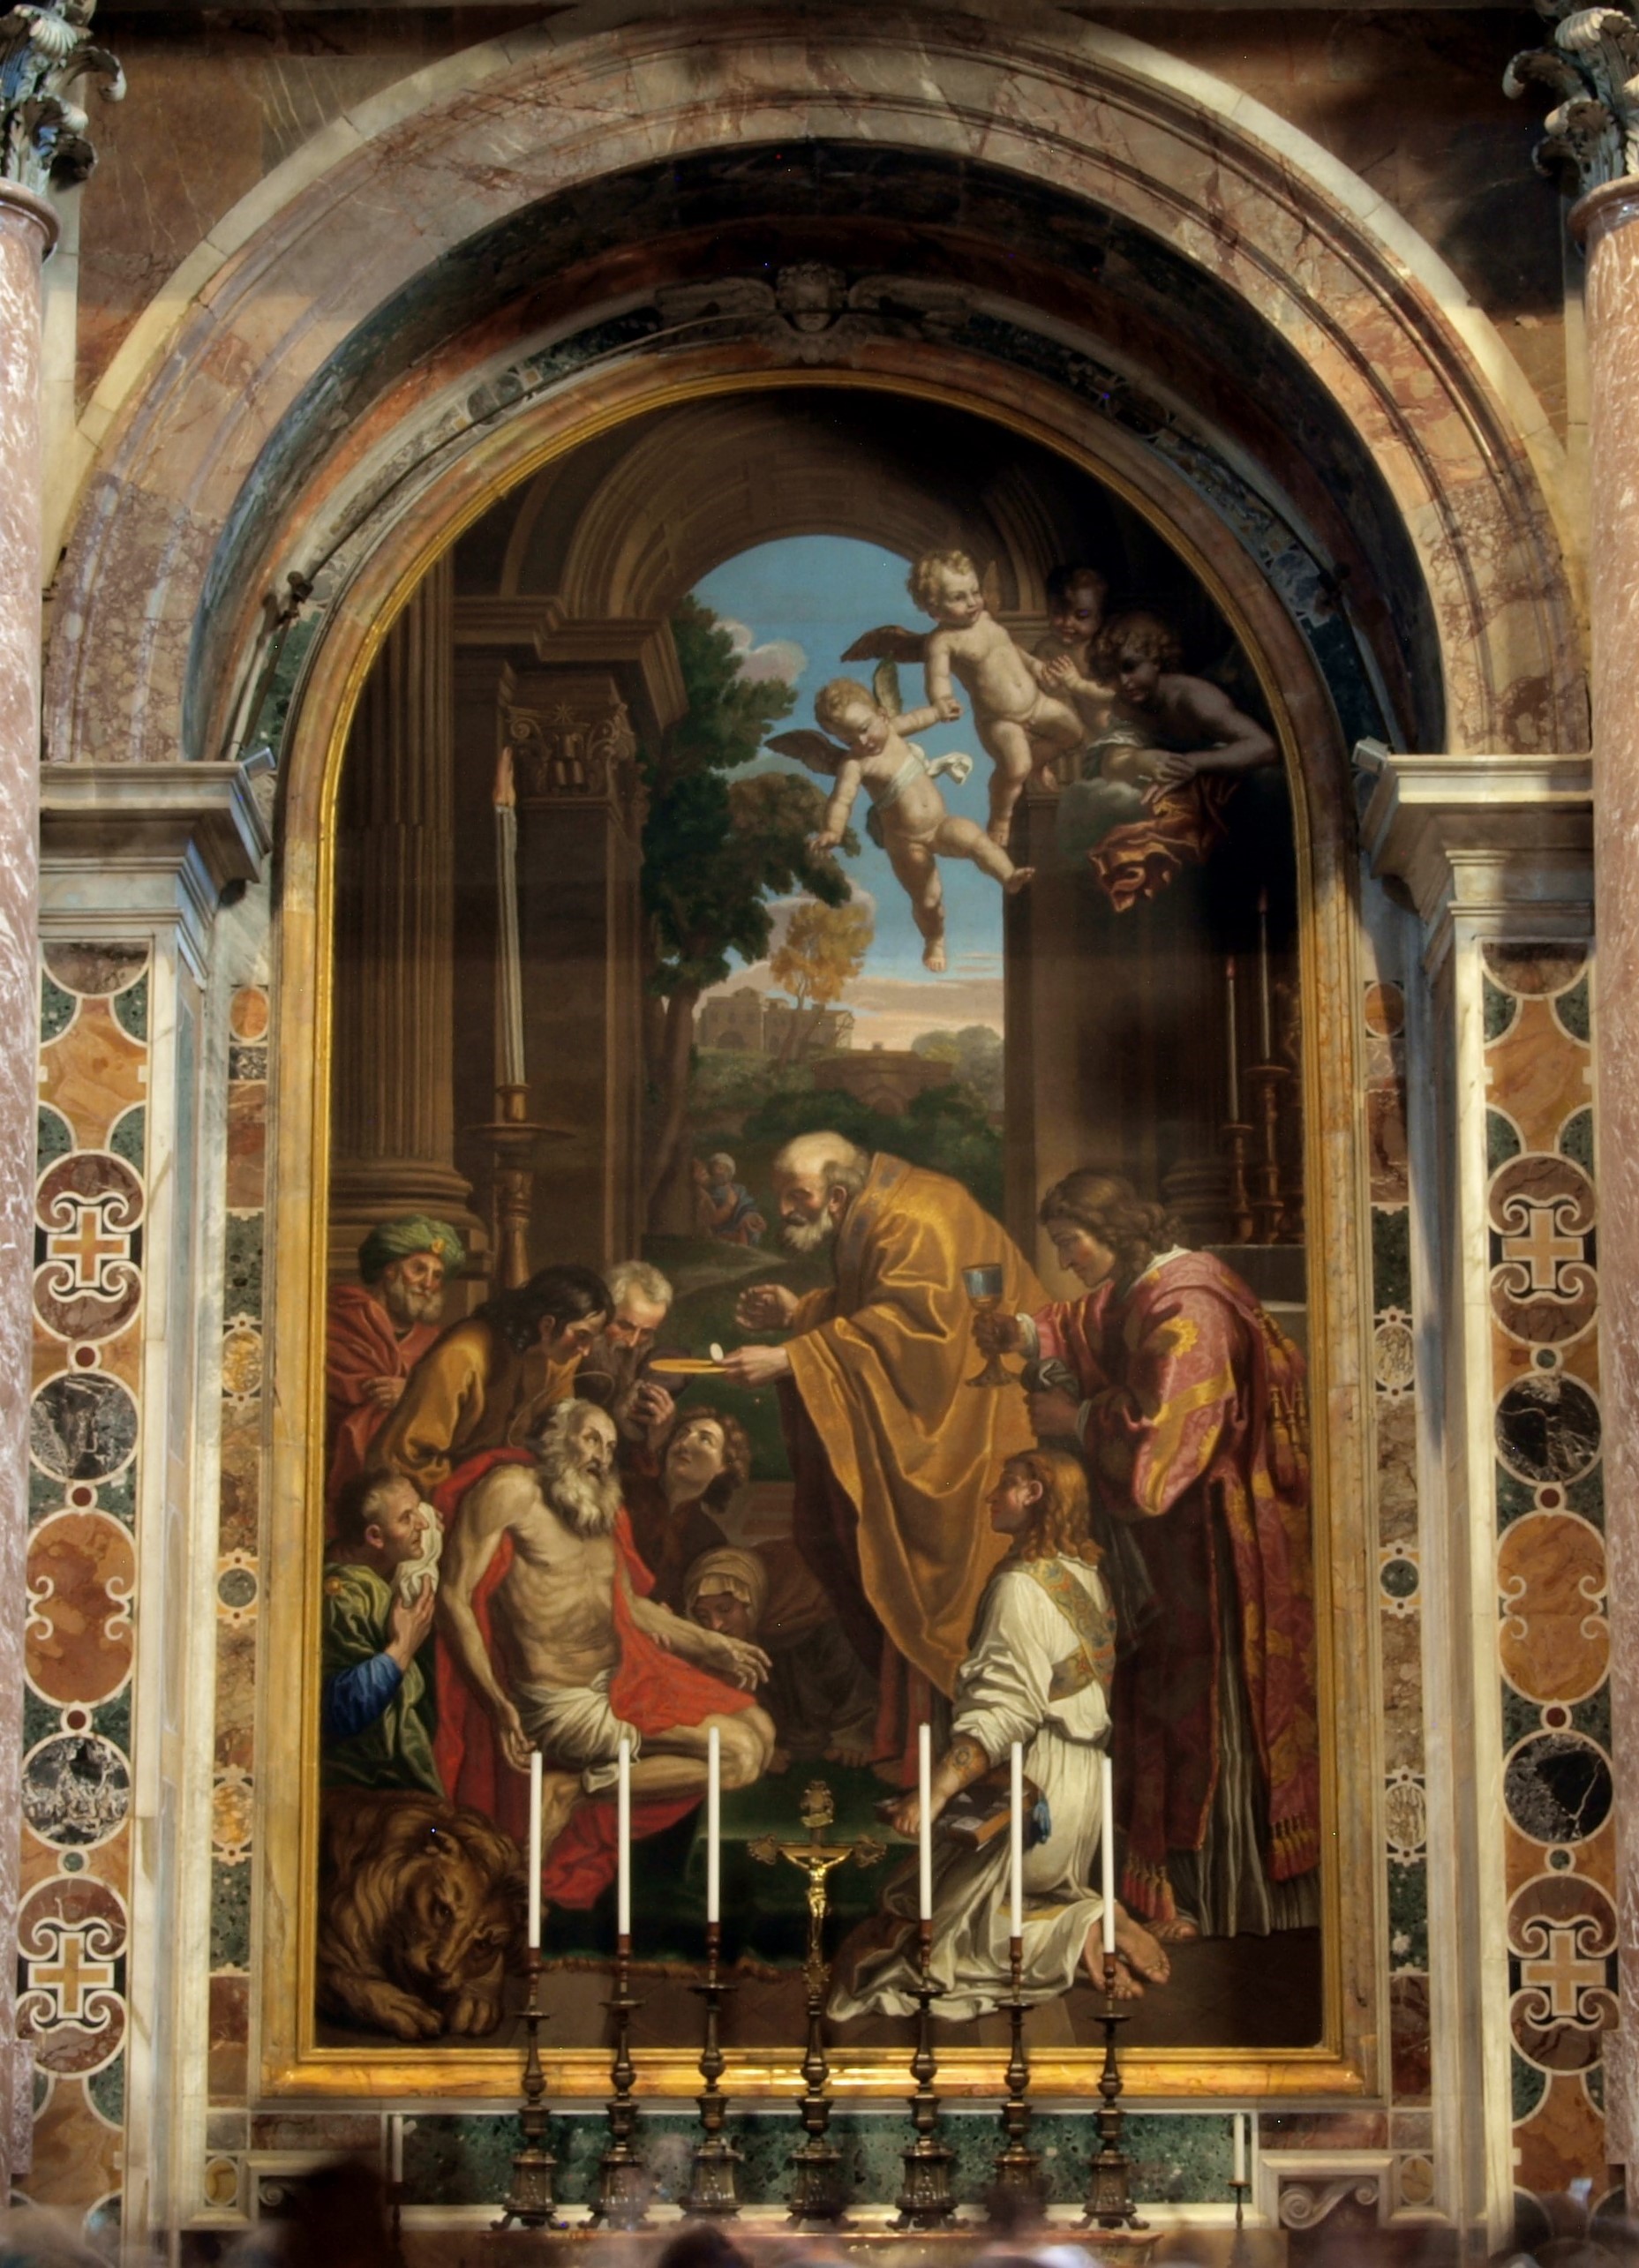 Highlights Of The Vatican Pinacoteca 10 Paintings You Need To See In The Vatican Picture Gallery